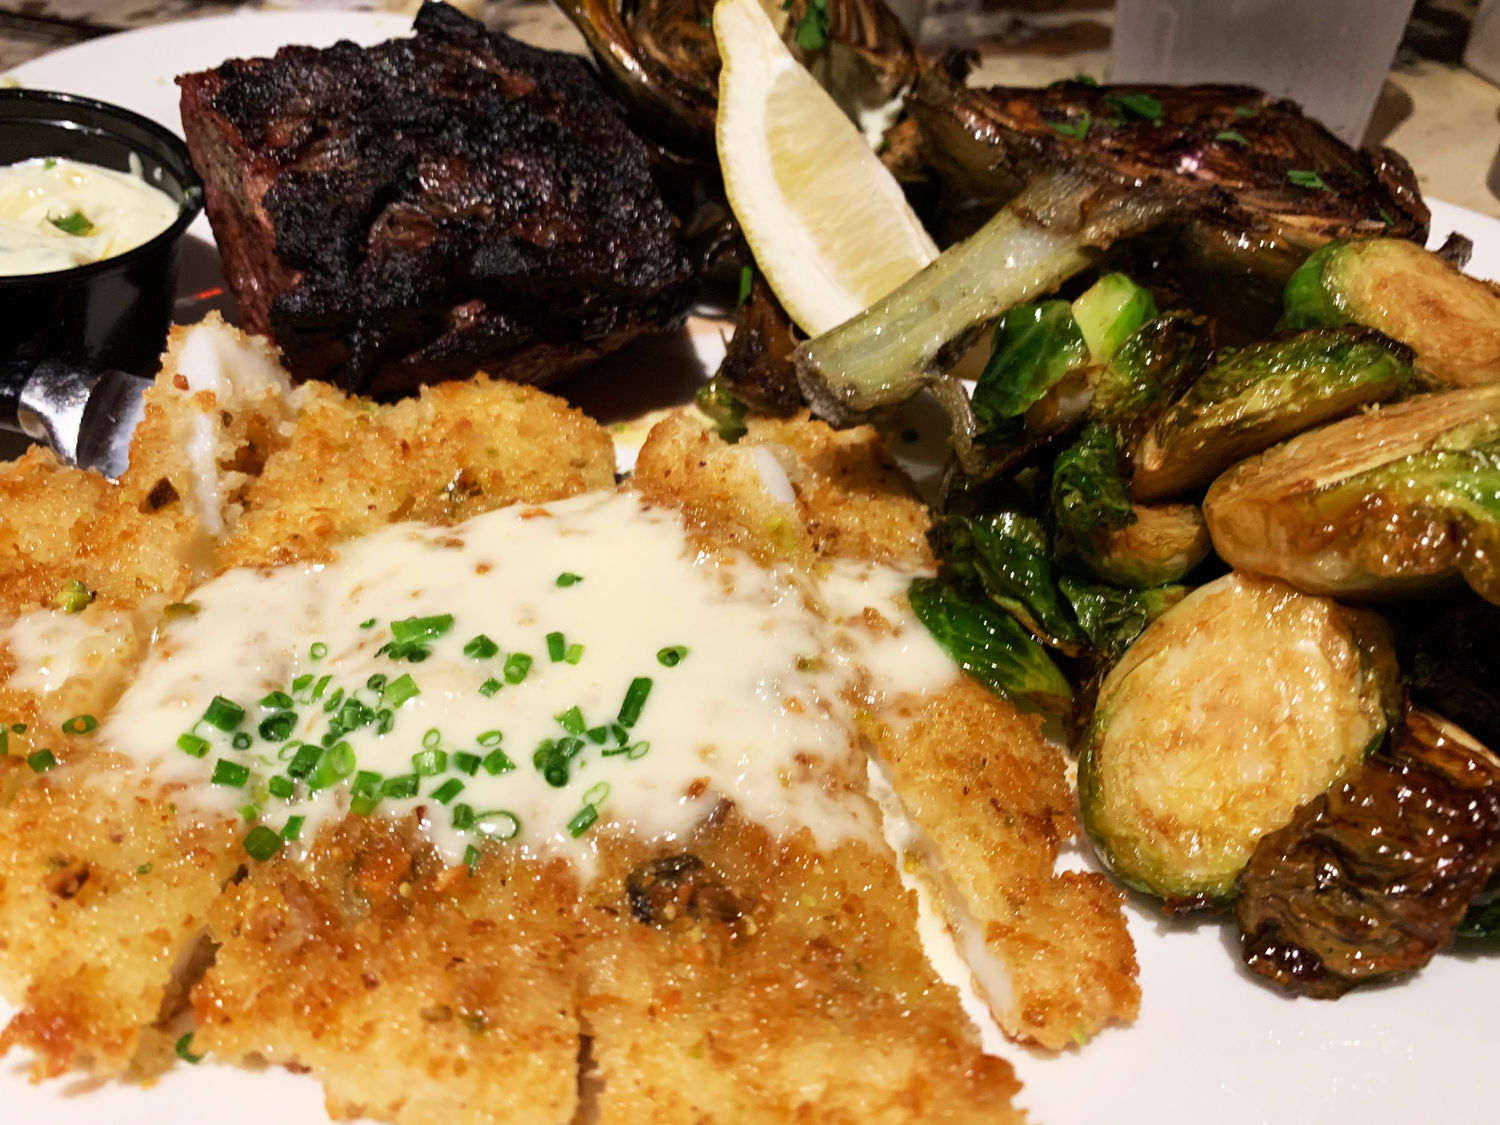 Pismo's is known for its seafood, especially the calamari steak. (WTOP/Noah Frank)